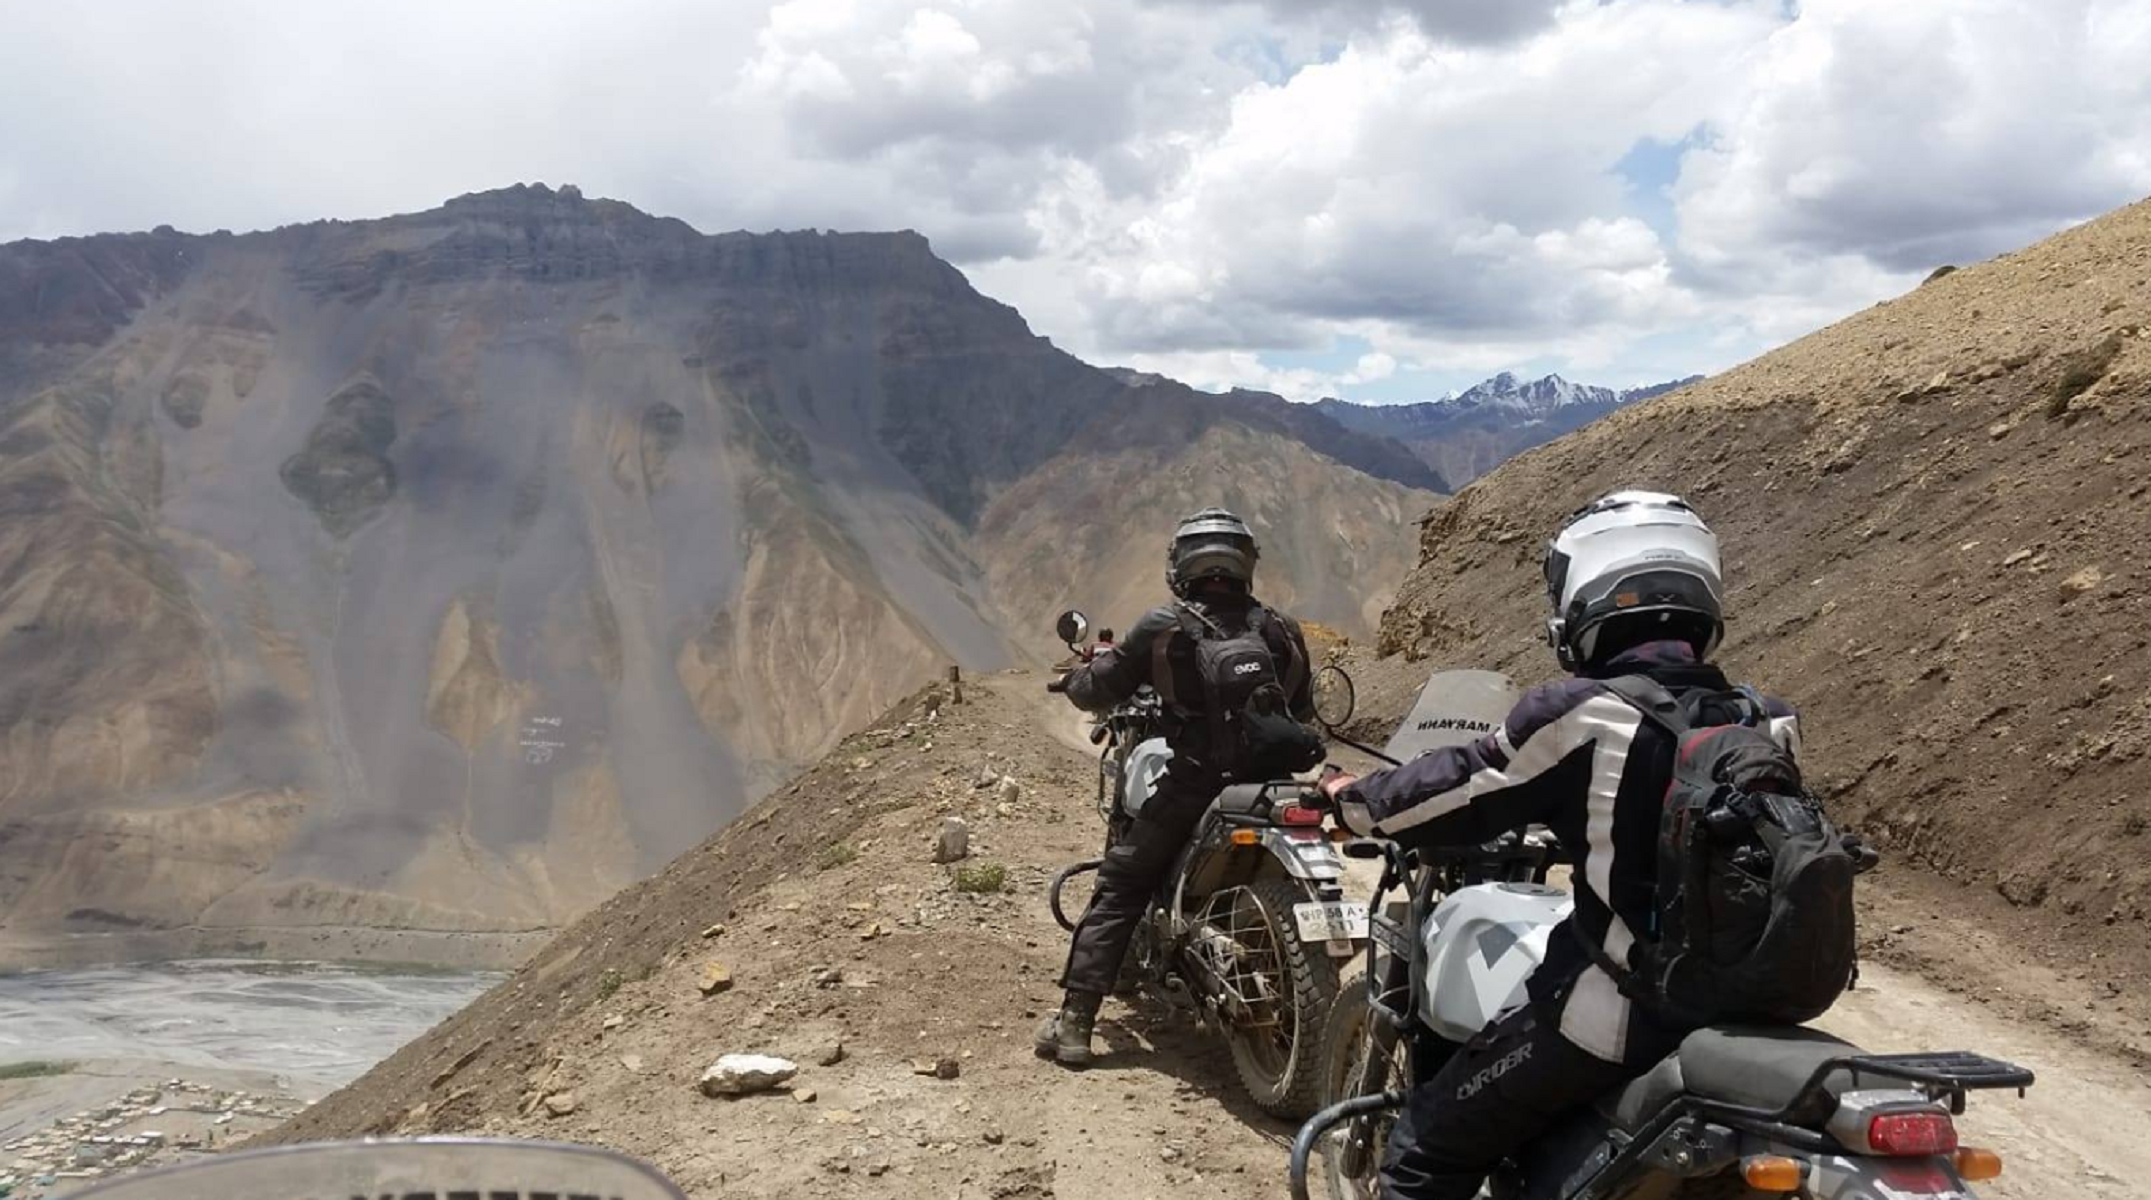 riders of the himalayas